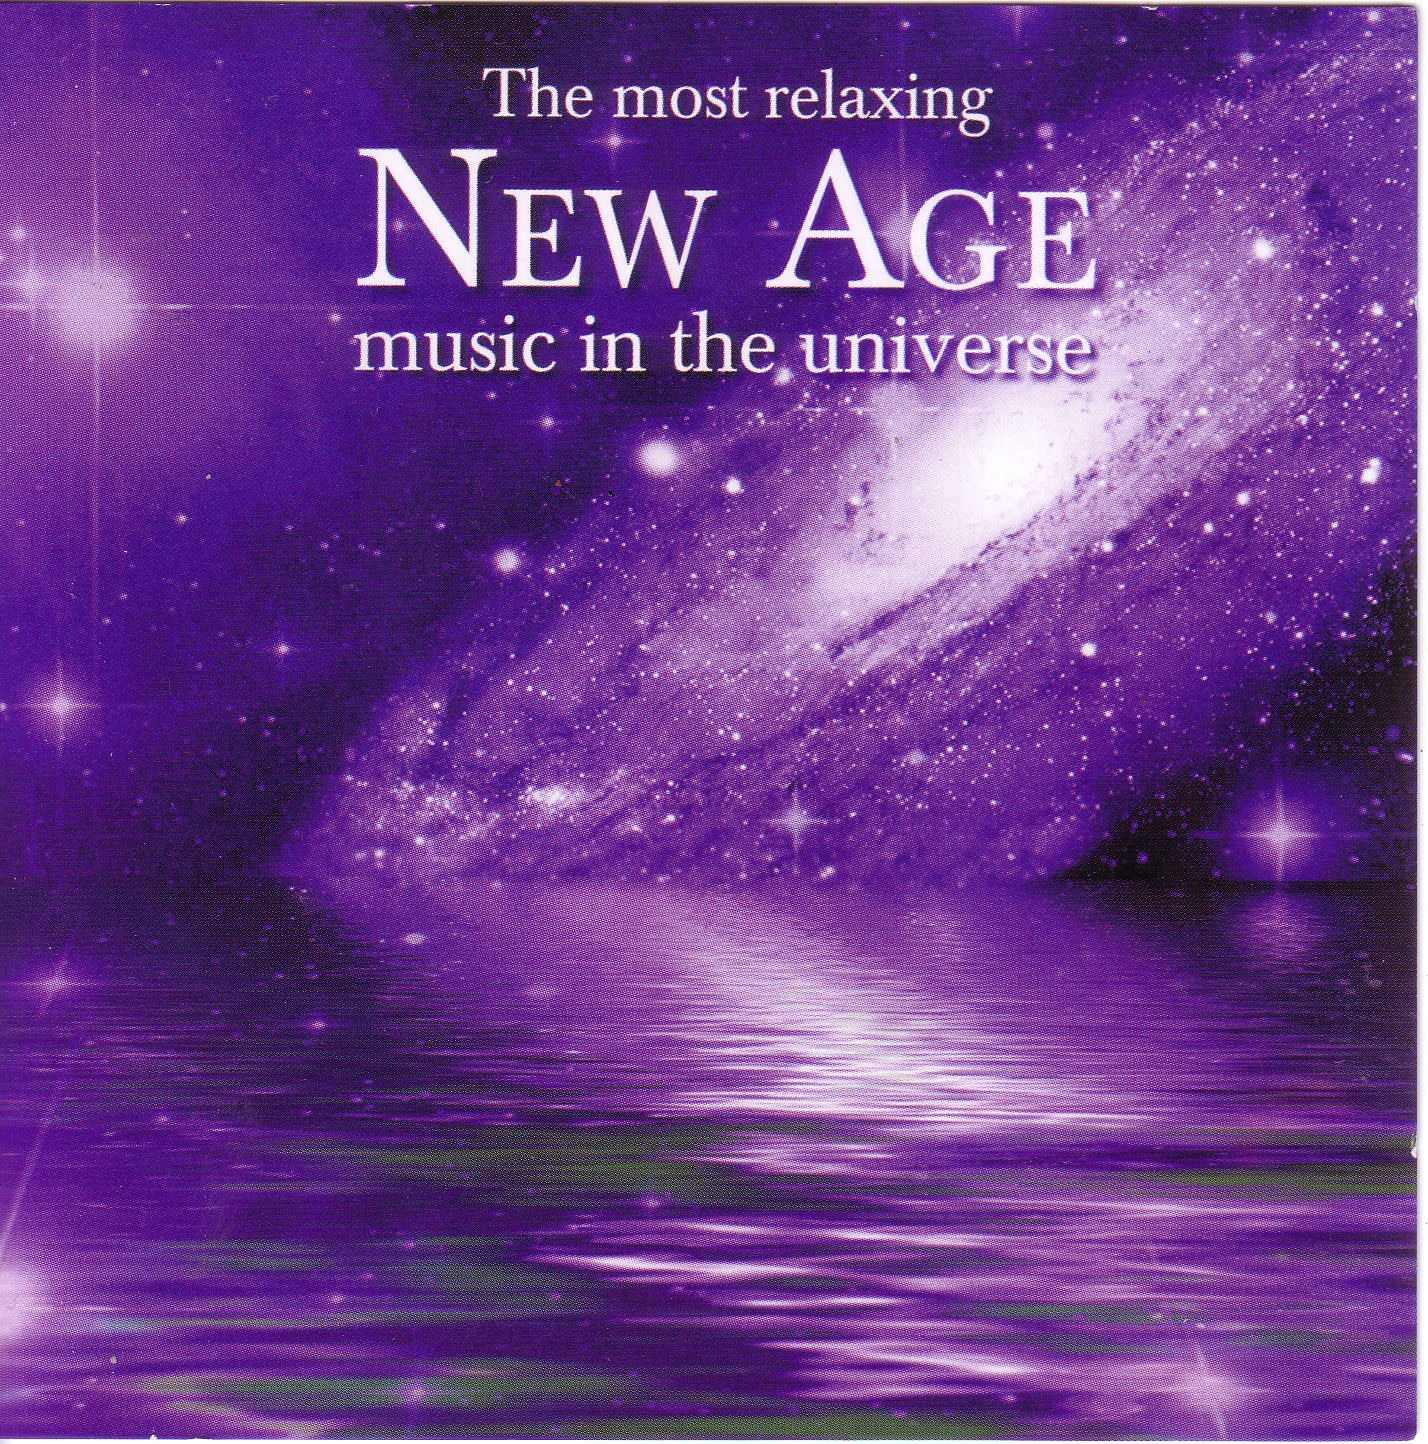 http://1.bp.blogspot.com/__68M6Sx1FDY/S_aUZyb5e6I/AAAAAAAAAEc/O2u2AWZNIcw/s1600/000-va--the_most_relaxing_new_age_music_in_the_universe-2cd-2005-(front).jpg